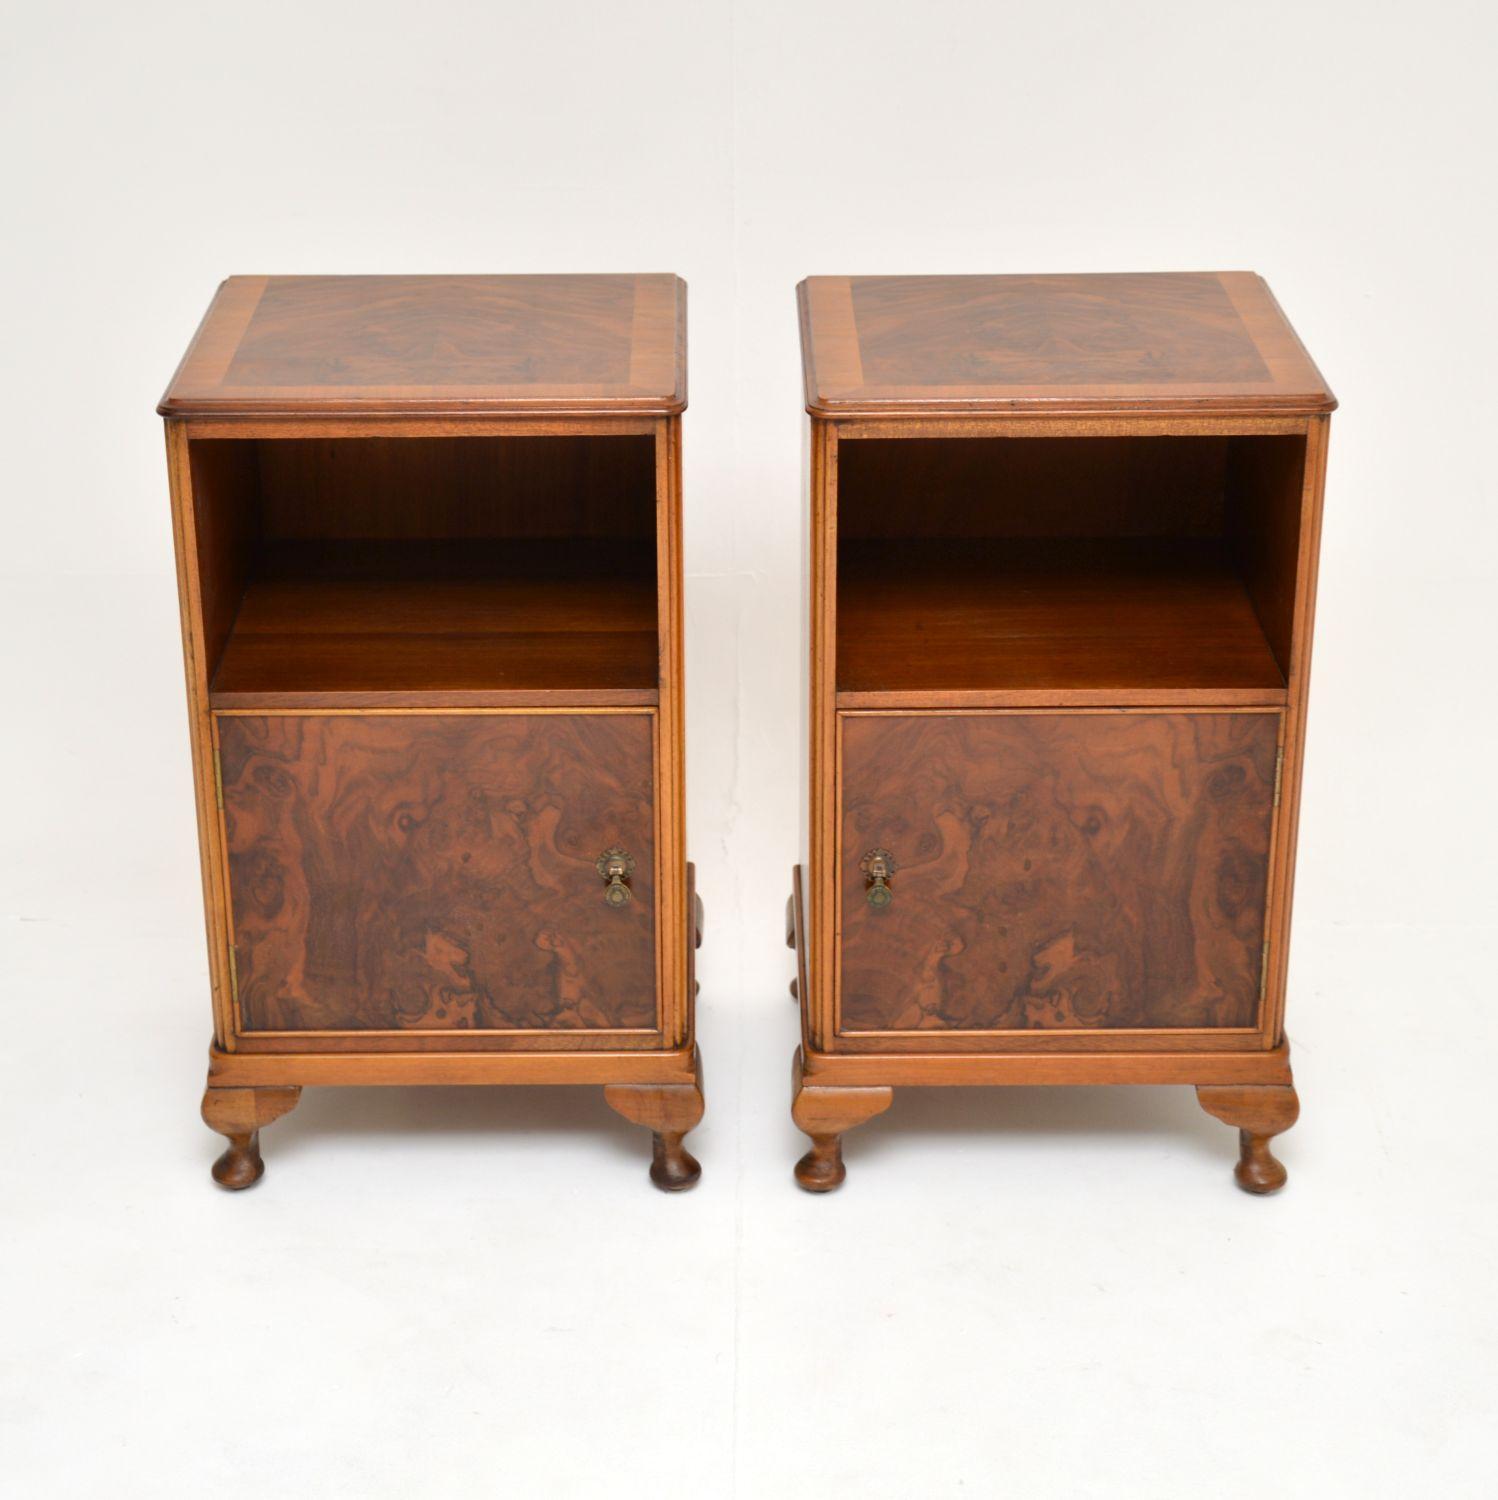 A superb pair of antique walnut bedside cabinets in the Queen Anne style. They were made in England, they date from around the 1920-30’s.

The quality is outstanding, they are beautifully constructed and have a very useful design. The tops are cross